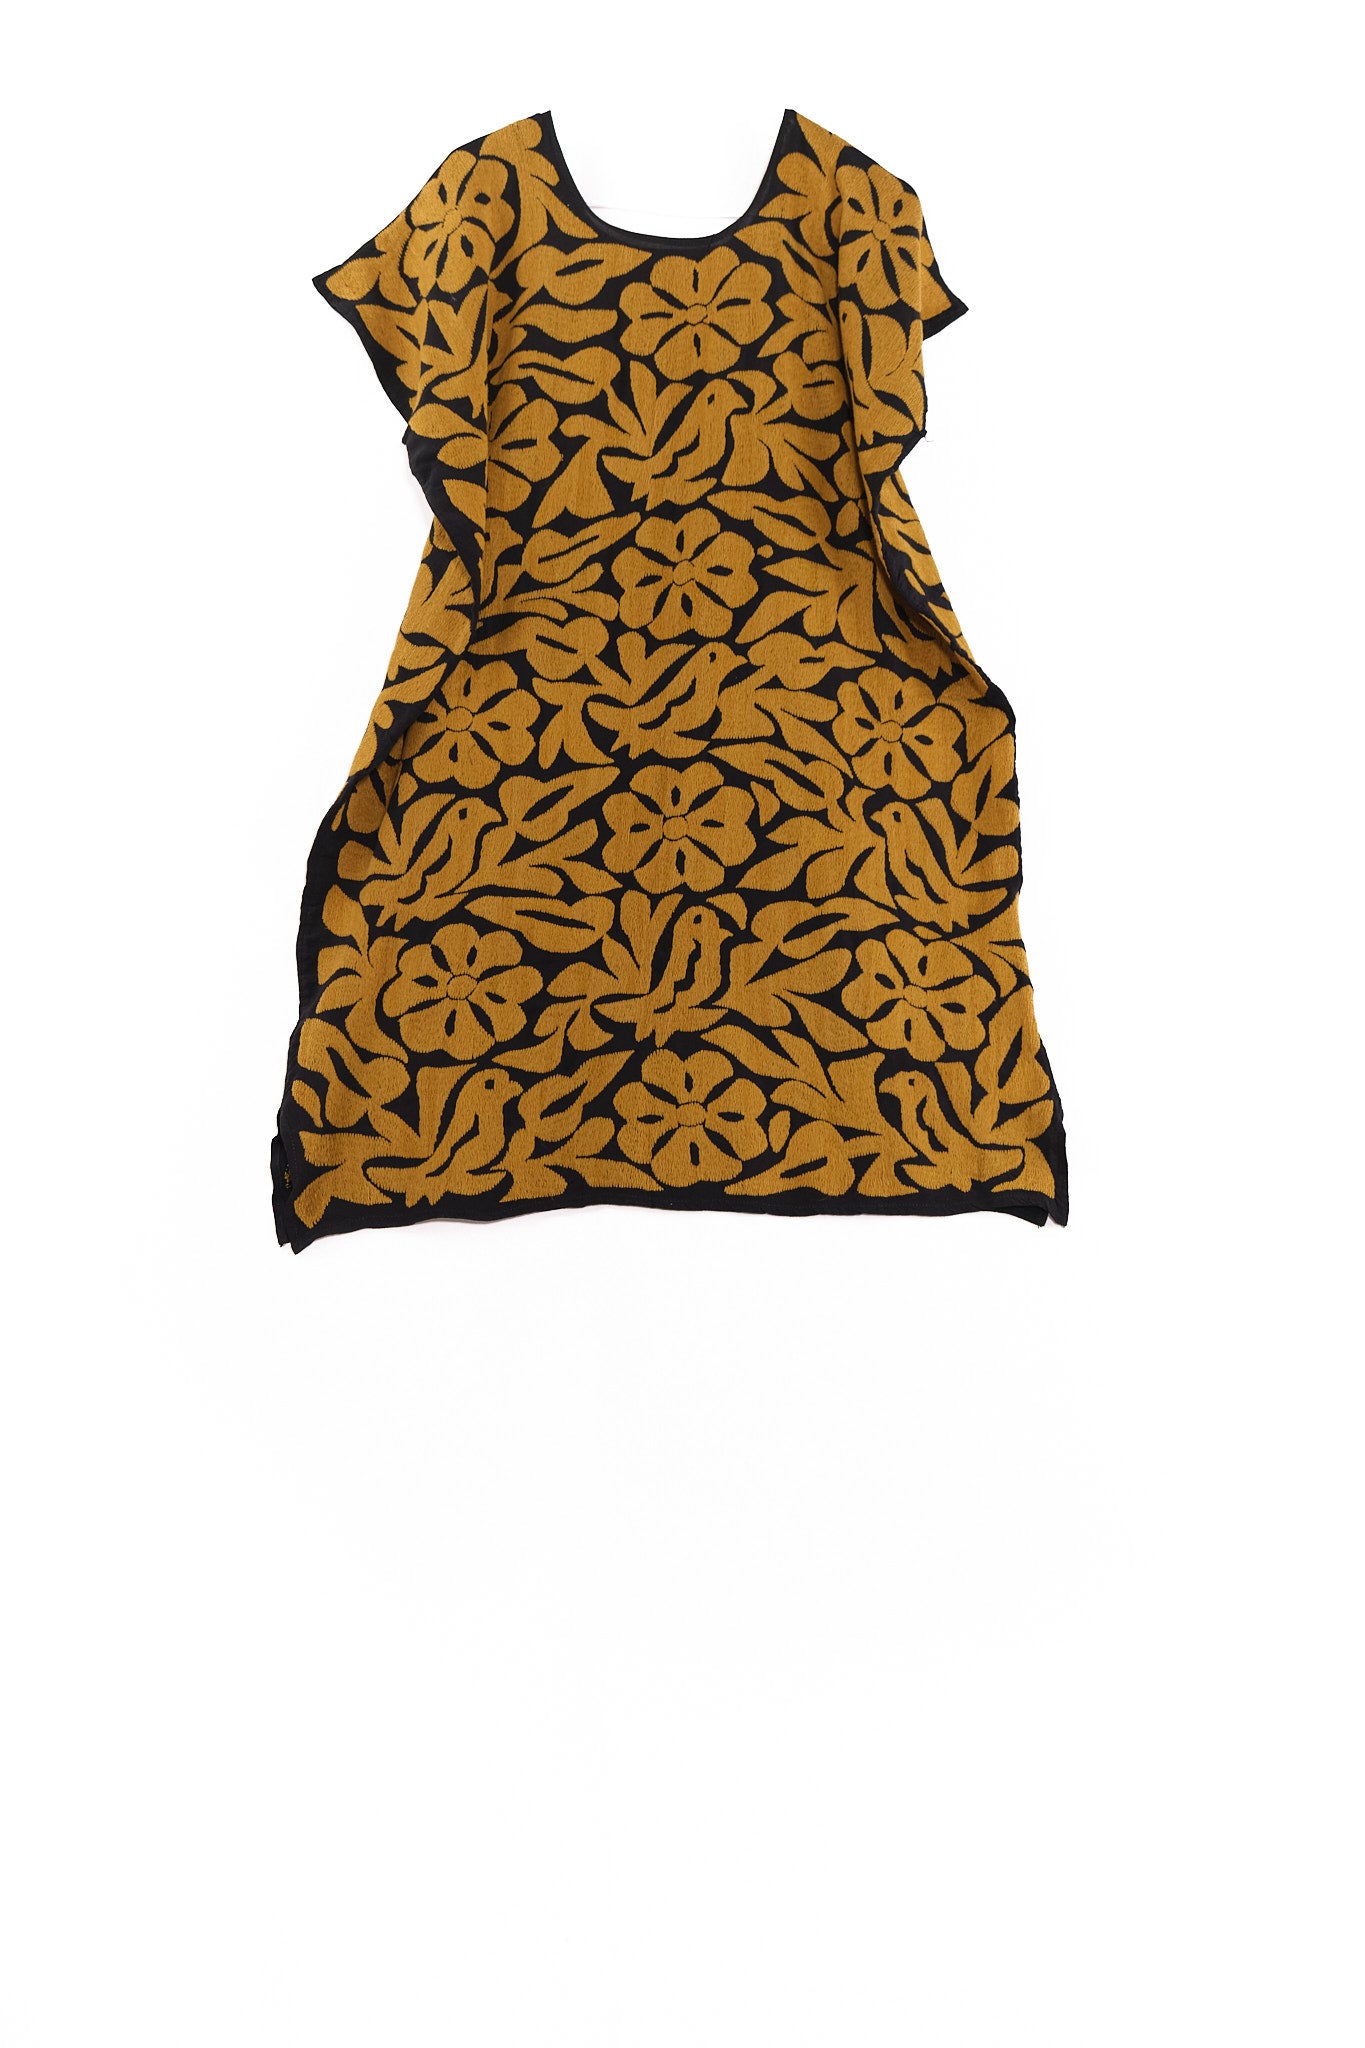 Adelina Dress black with mustard embroidery garment